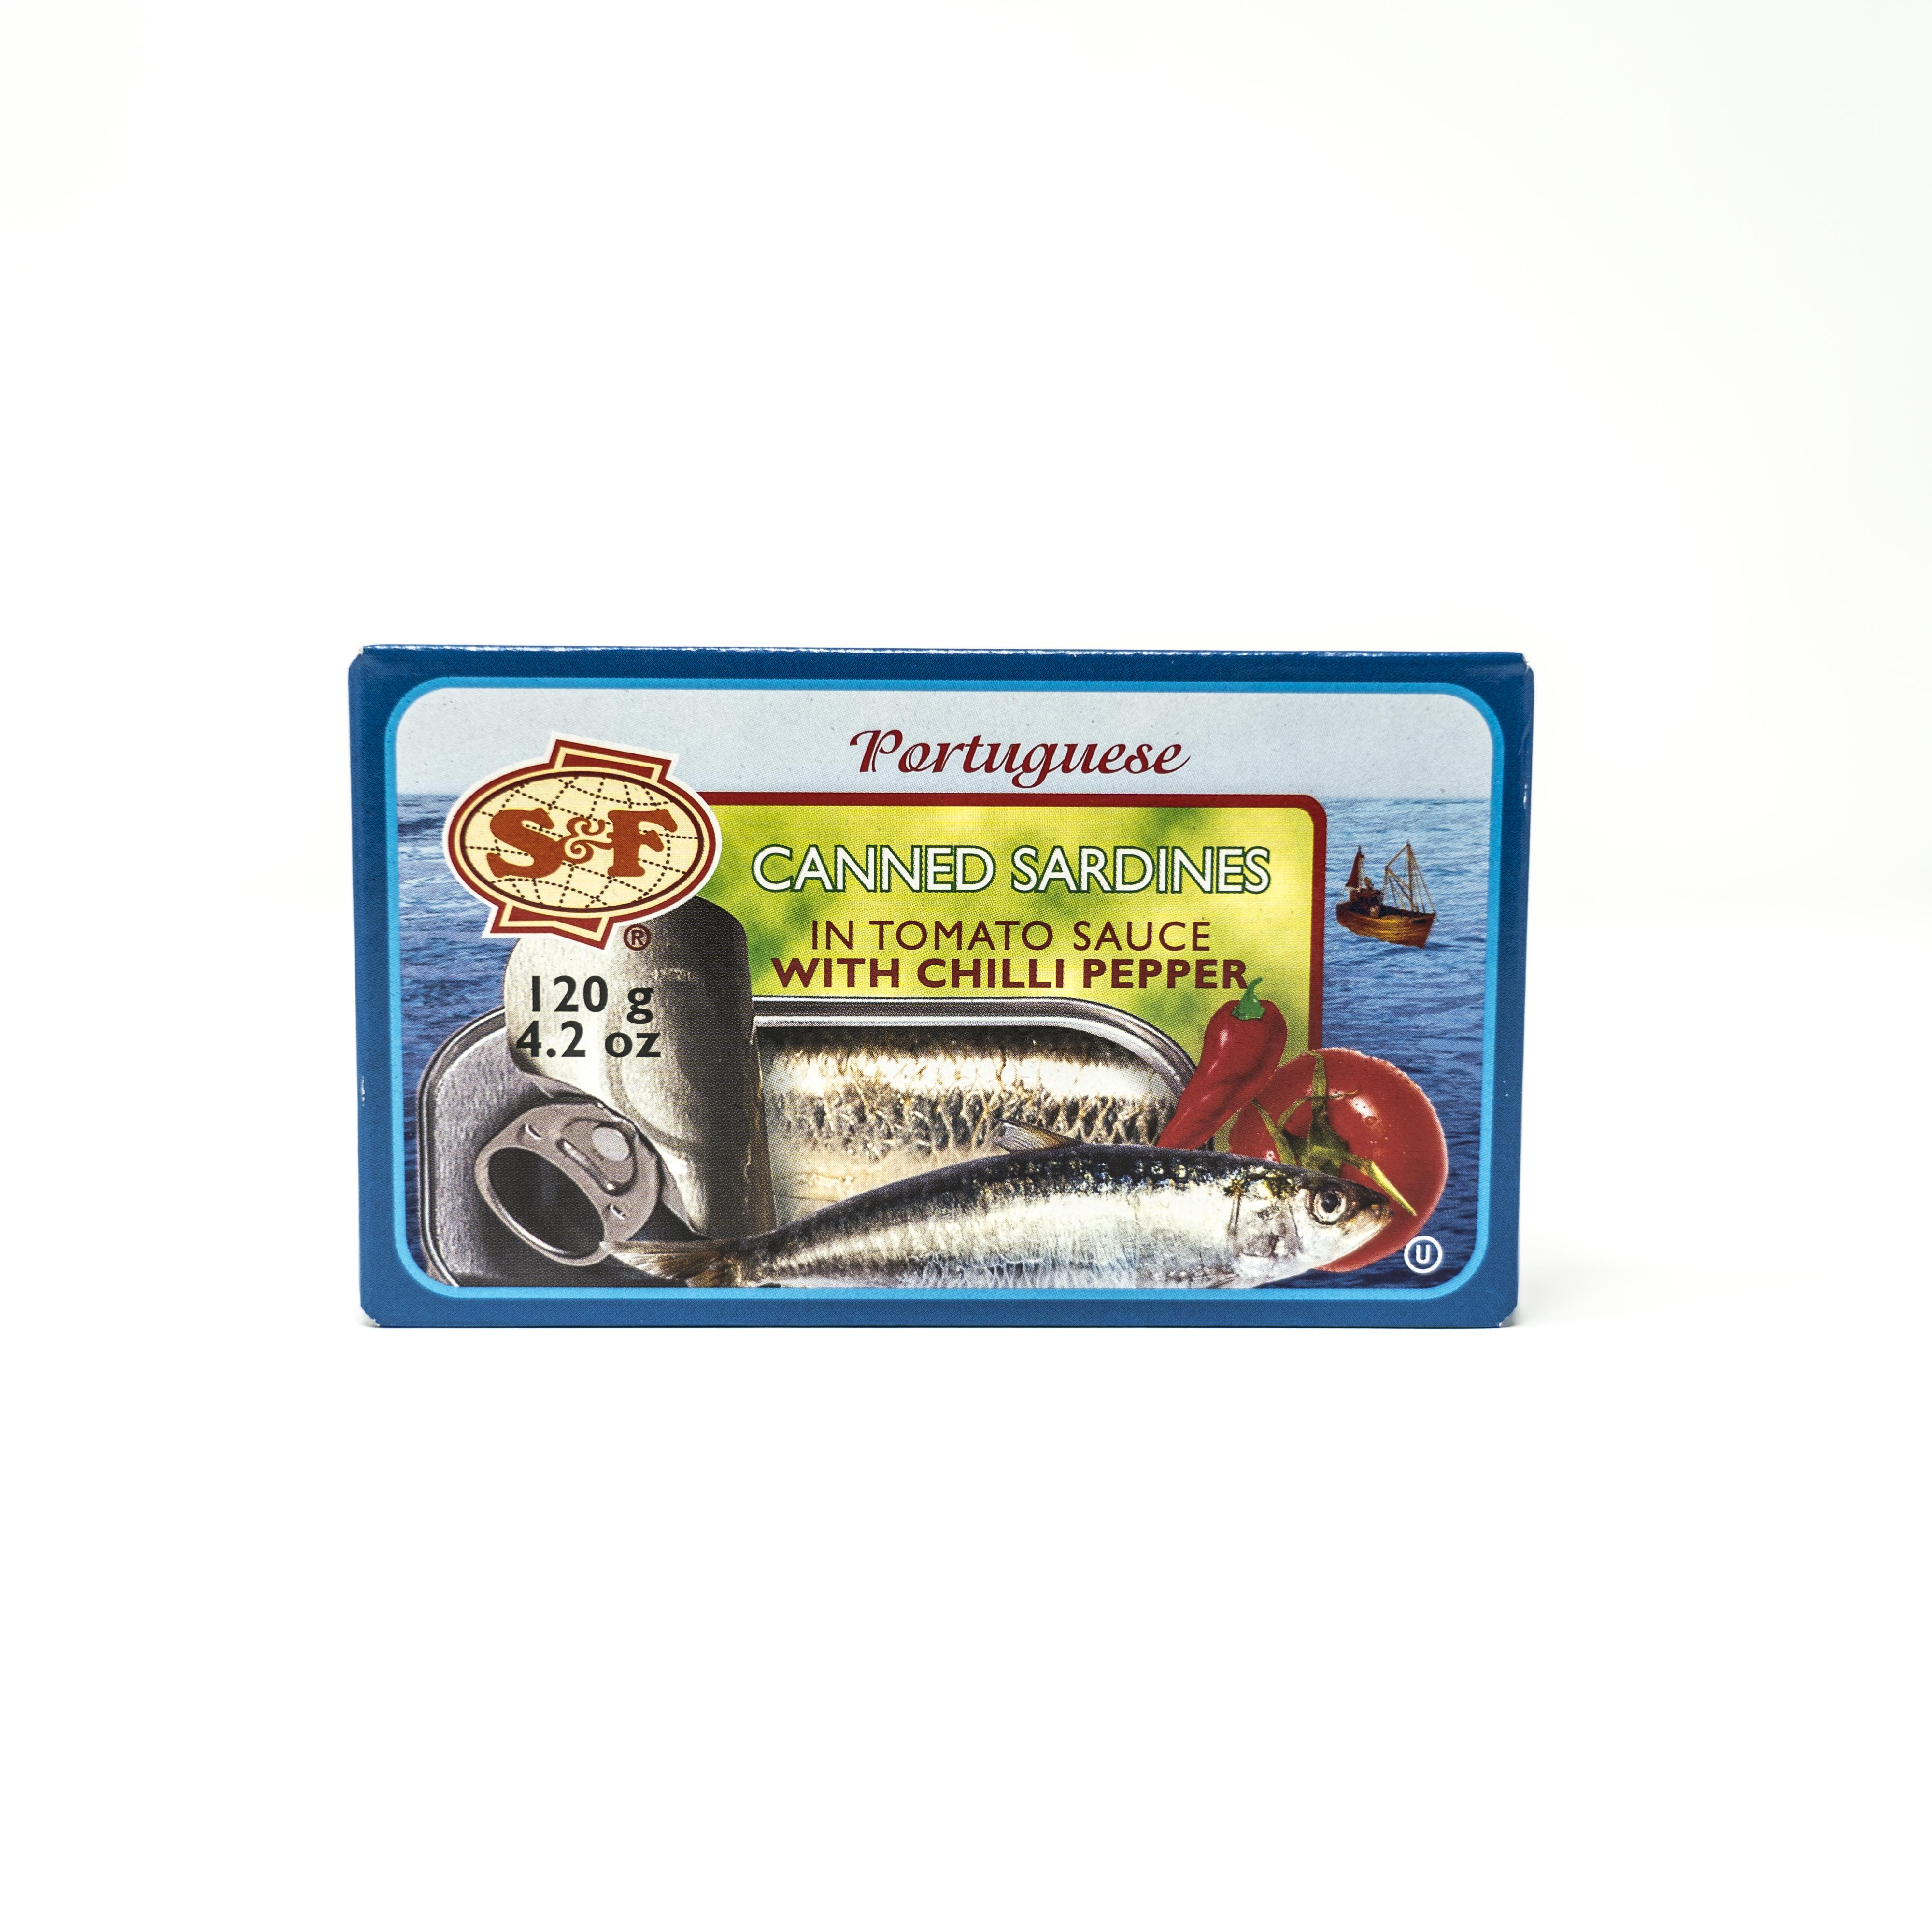 S&F Portuguese Canned Sardines in Tomato Sauce with Chilli Pepper